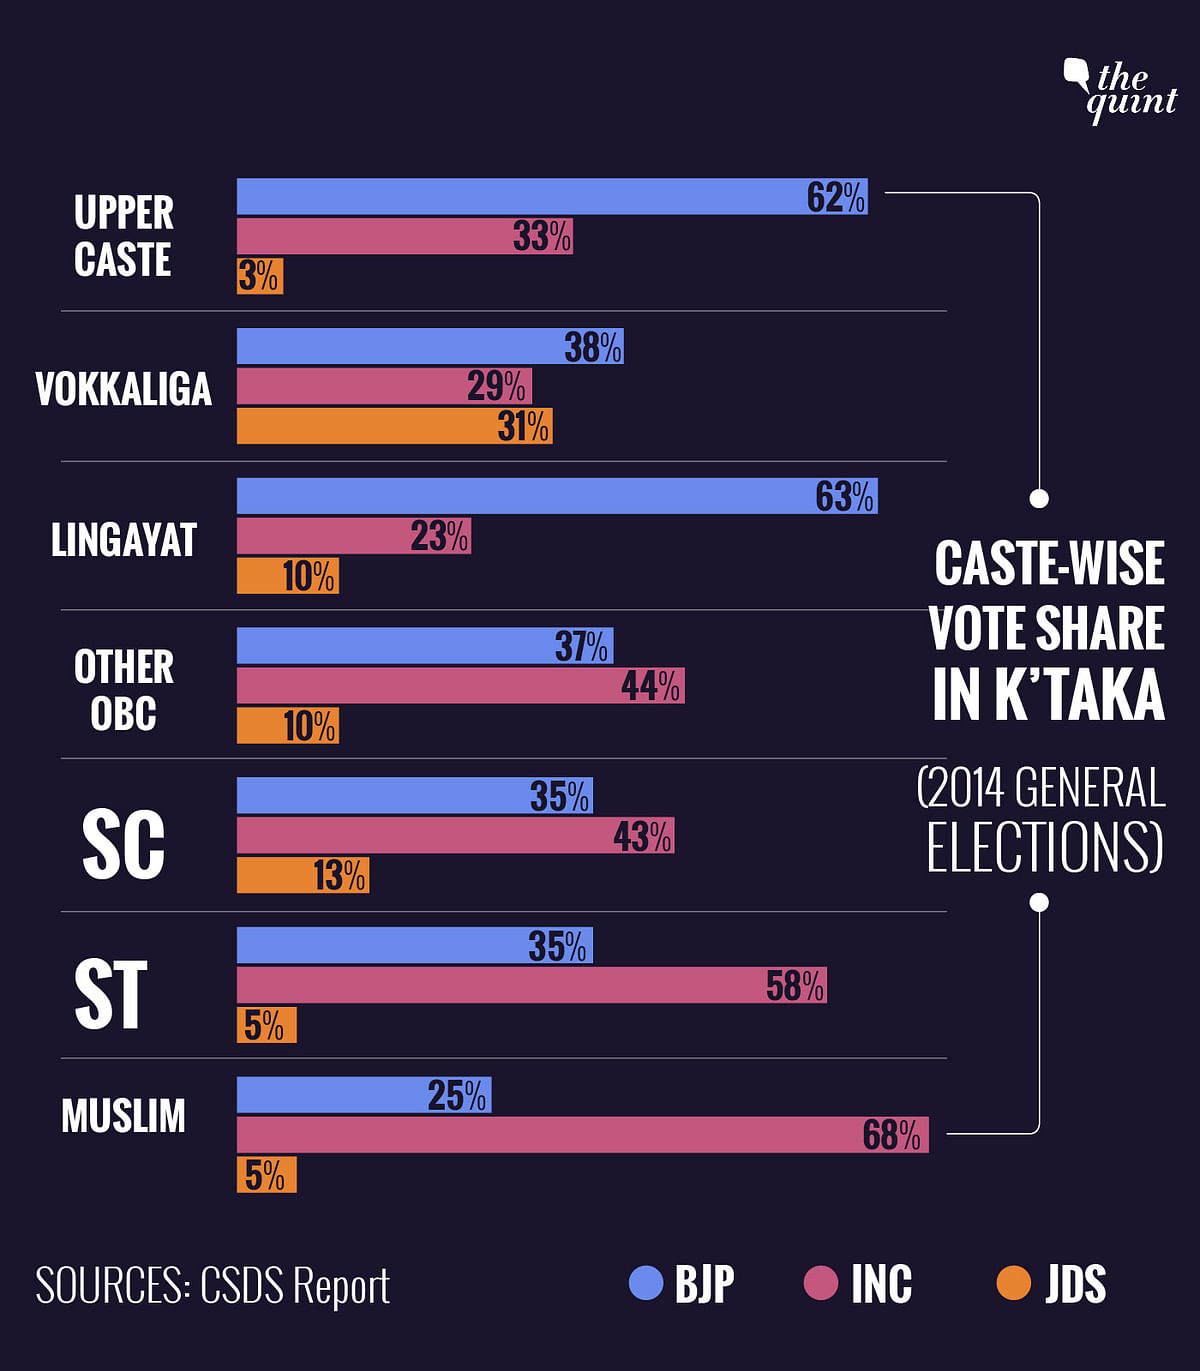 Caste has always been a key factor in K’taka’s politics & this time, it is the Vokkaliga vote that holds the key.